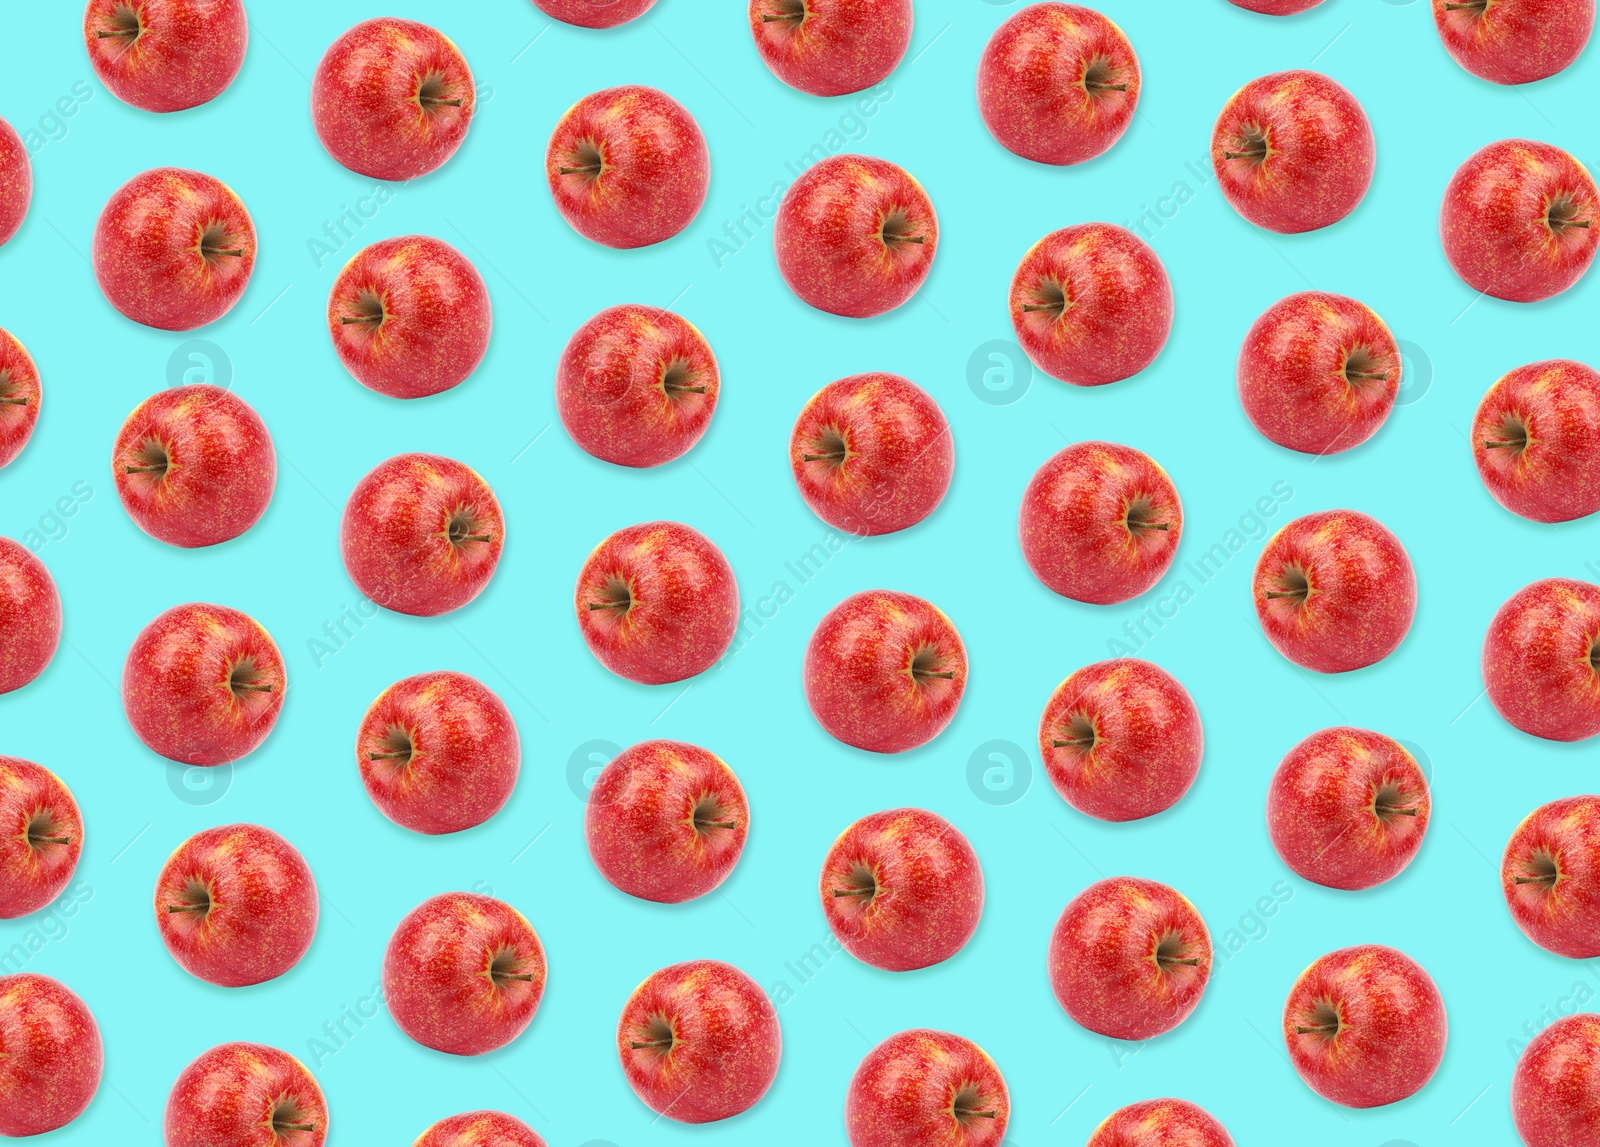 Image of Pattern of red apples on light blue background